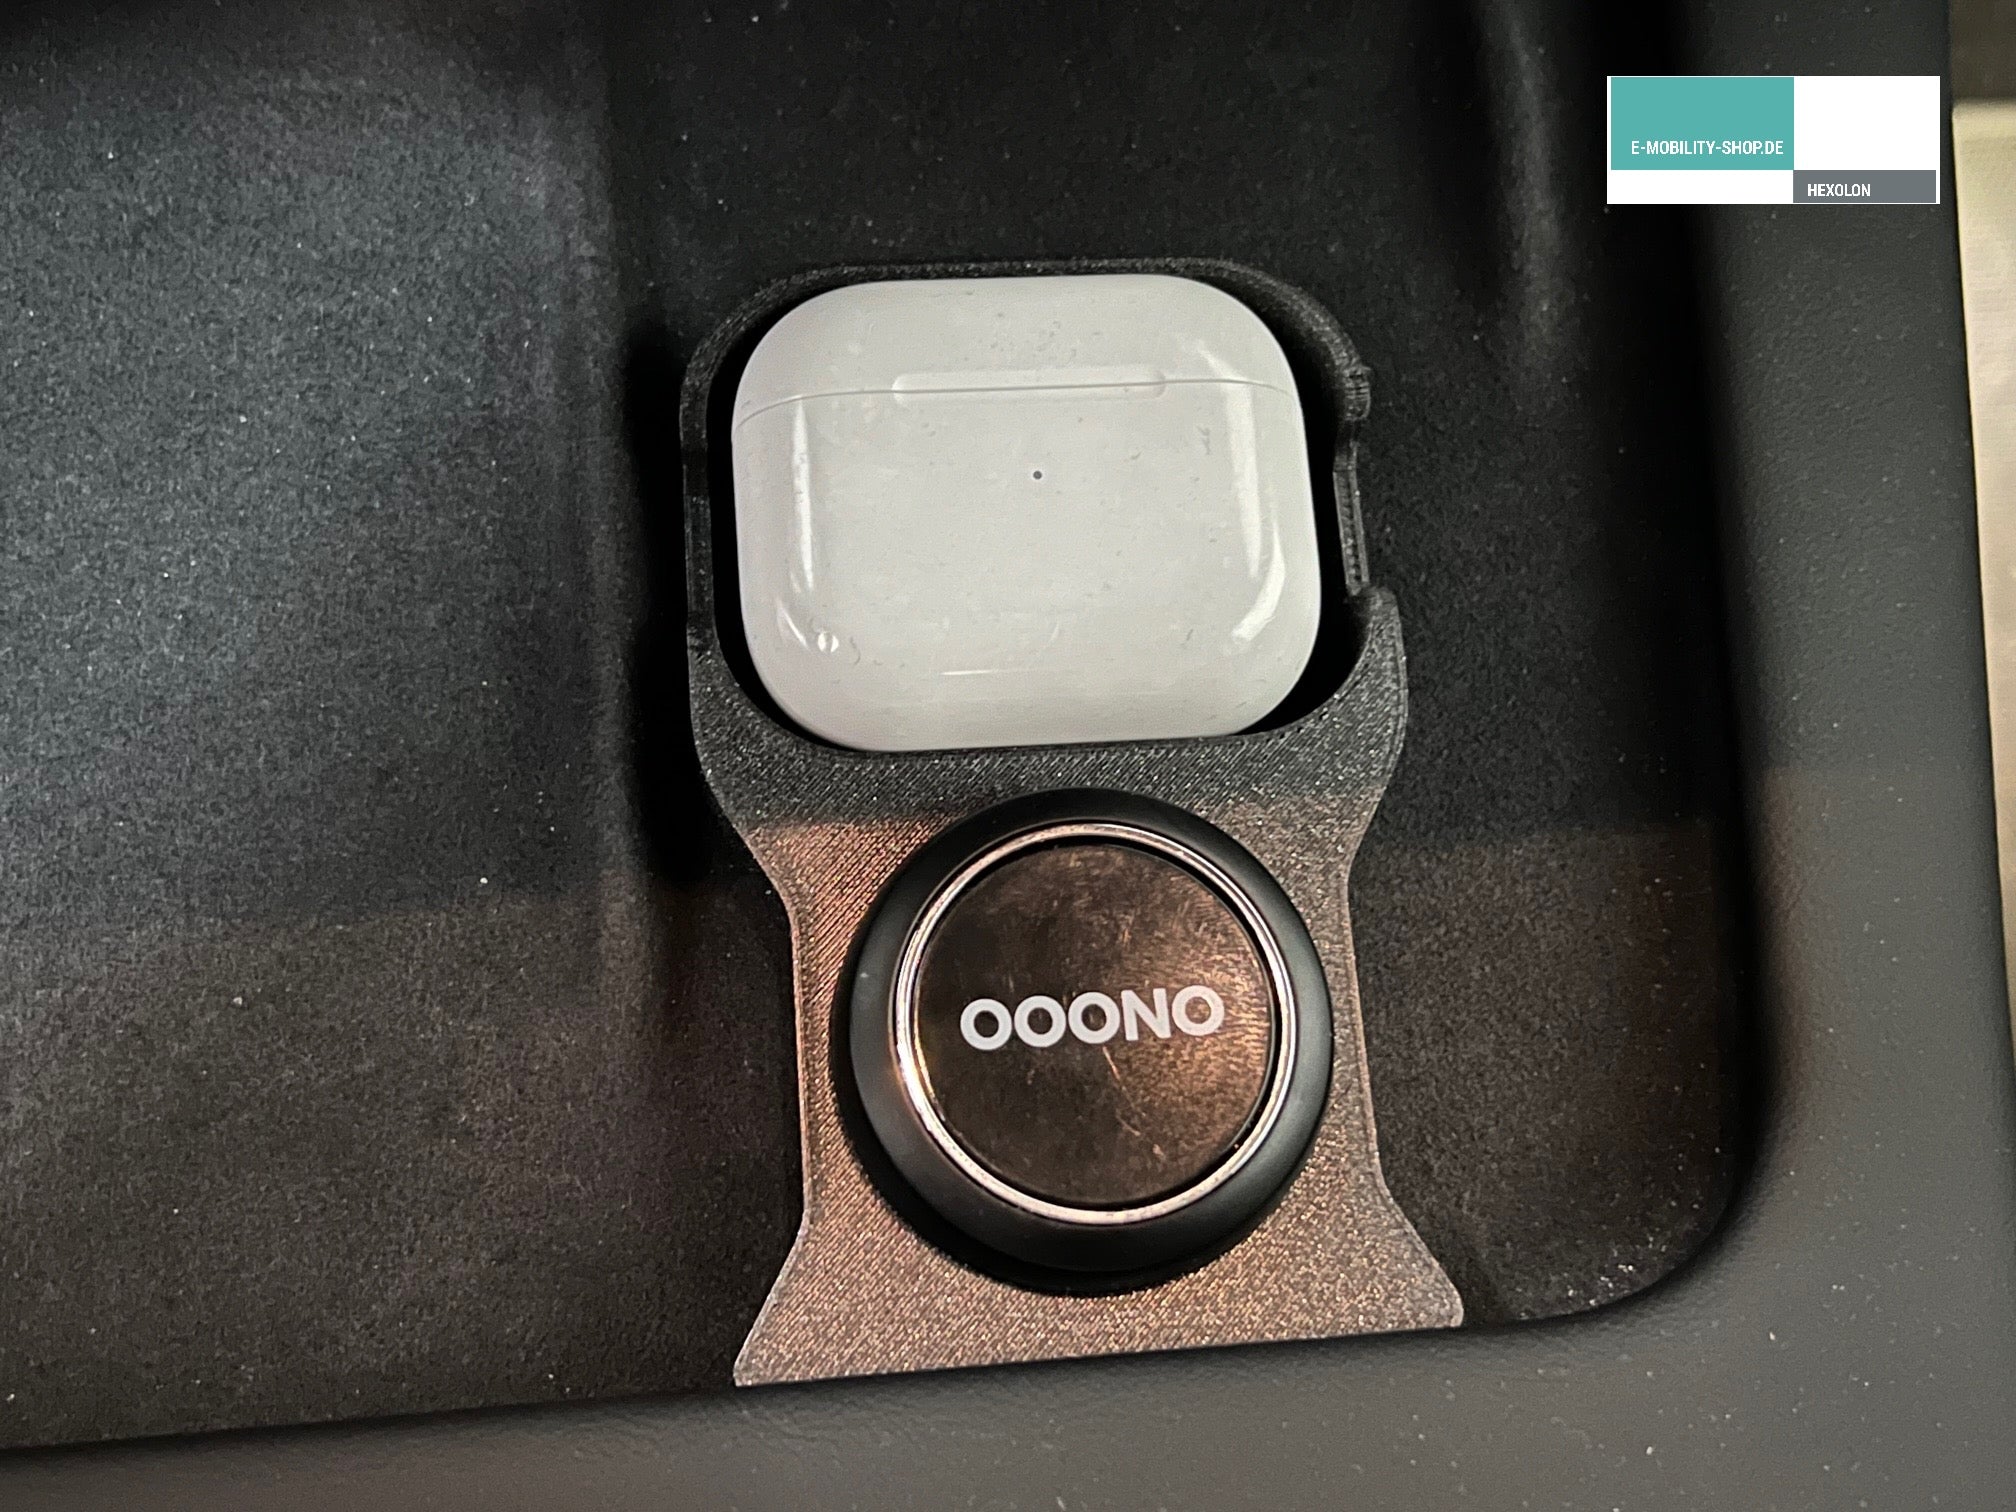 AirPods holder for the inductive charging cradle in the Tesla with OOONO  mounting option